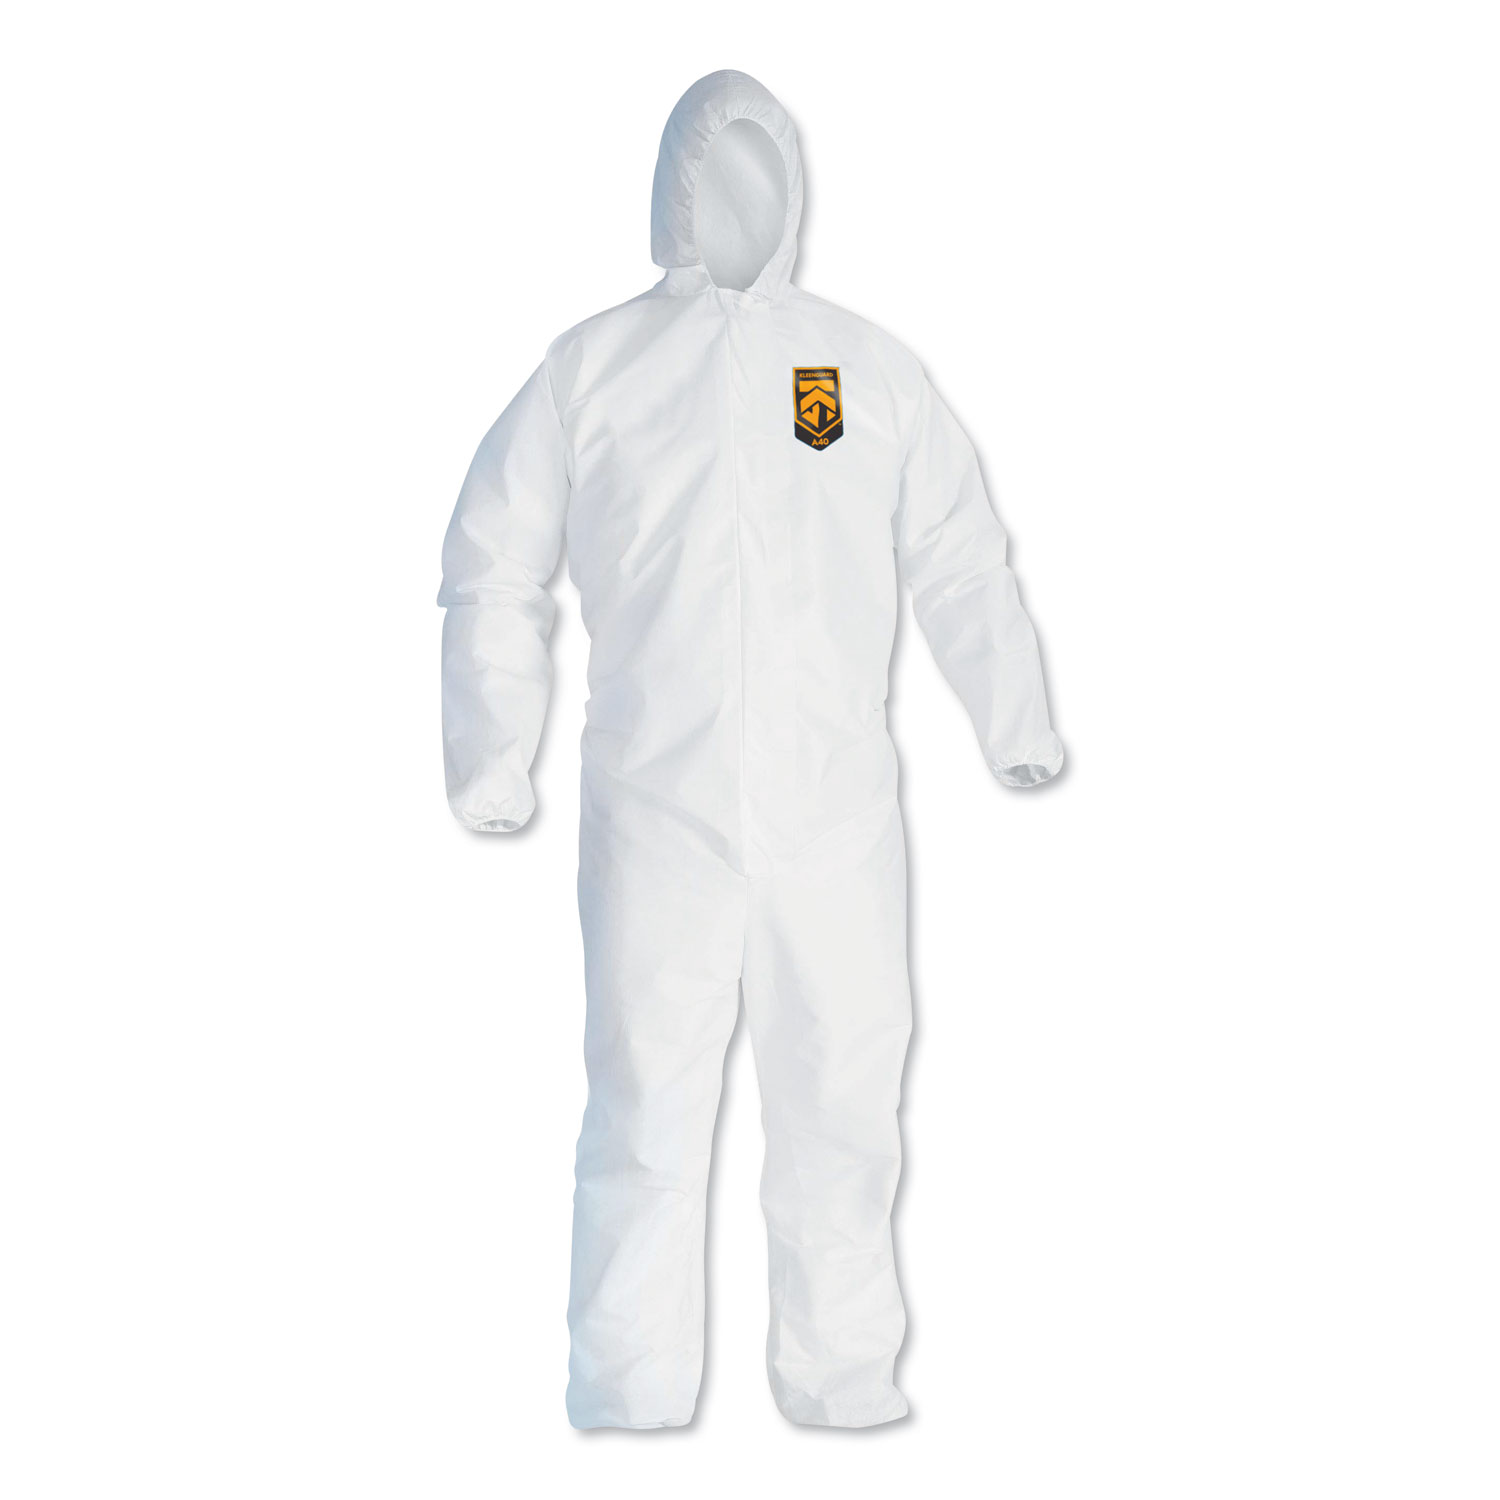  KleenGuard KCC 44325 A40 Elastic-Cuff and Ankles Hooded Coveralls, White, 2X-Large, 25/Case (KCC44325) 